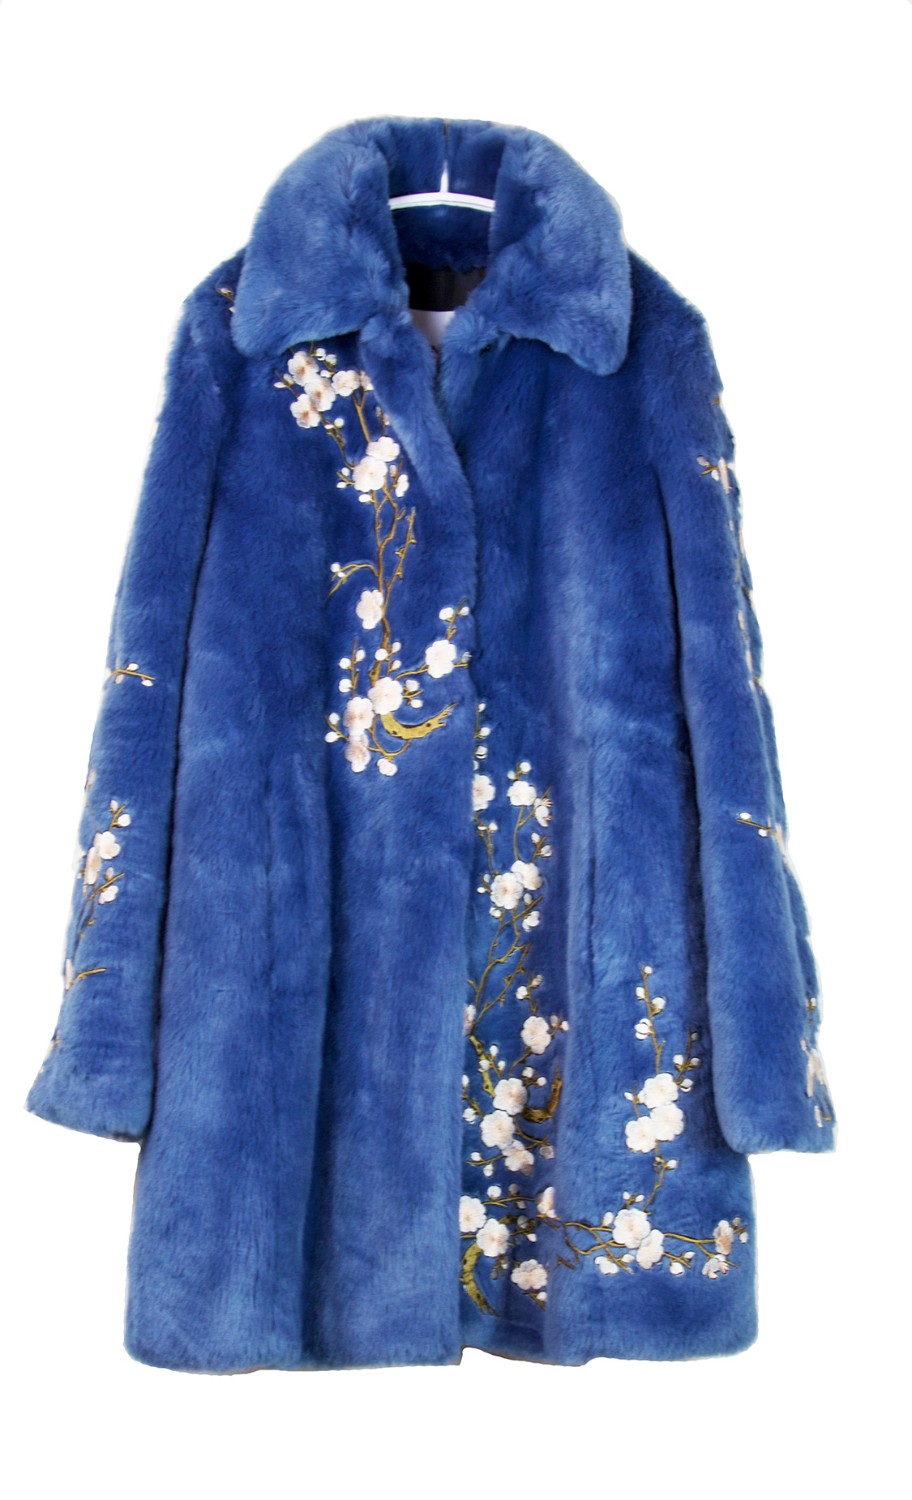 shop Ainea  Cappotti: Ainea faux fur with floral embroidered embellishment, light blue with pink cherry tree flower details. Shirt style collar, long sleeves, concealed fastening on front with buttons and pockets on side. Composition: 81% acrylic and 19% polyester. Made in Italy.. 
Total length (size 42): 87 cm.Chest (size 42): 100 cm.Bottom width (size 42): 132 cm.Sleeve length including shoulder (size 42): 80 cm. Italian size.
 number 765